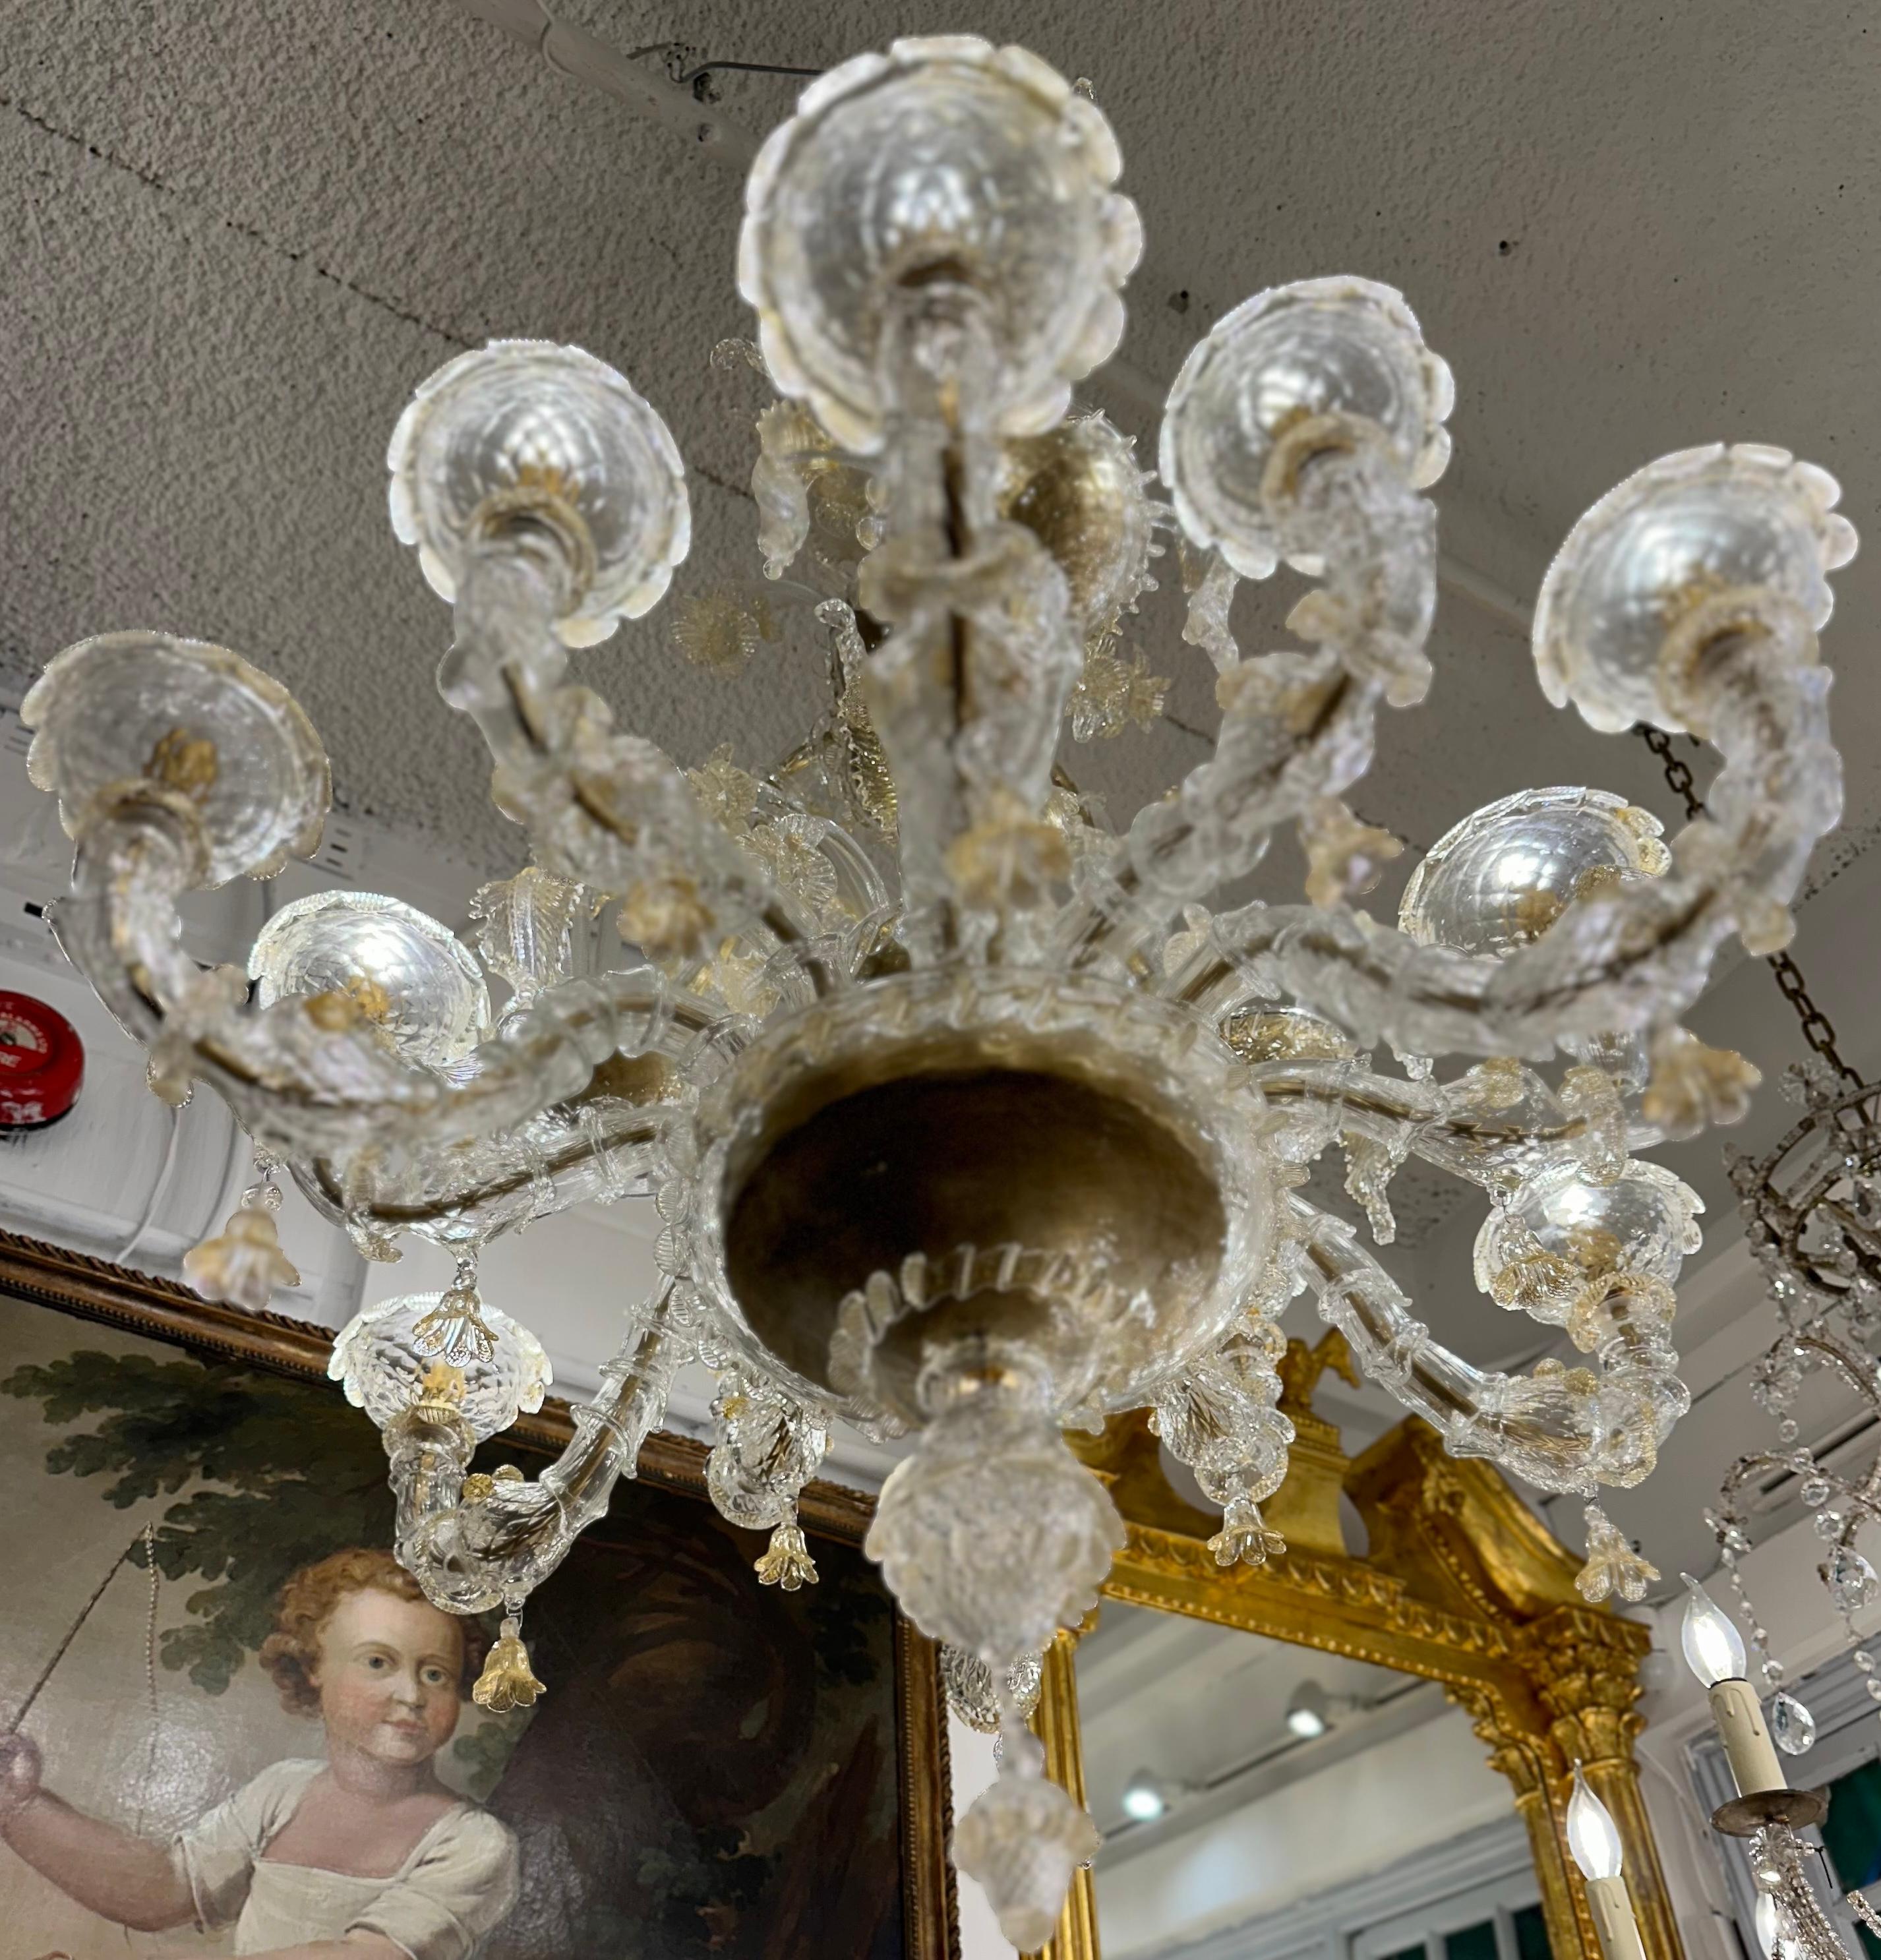 A magnificent hand blown murano glass chandelier that is exquisite in its craftsmanship and design. Clear and 24 kt gold leaf has been added into the hand blown glass, which is formed into delicate foliage and bell like flowers lending a ethereal,